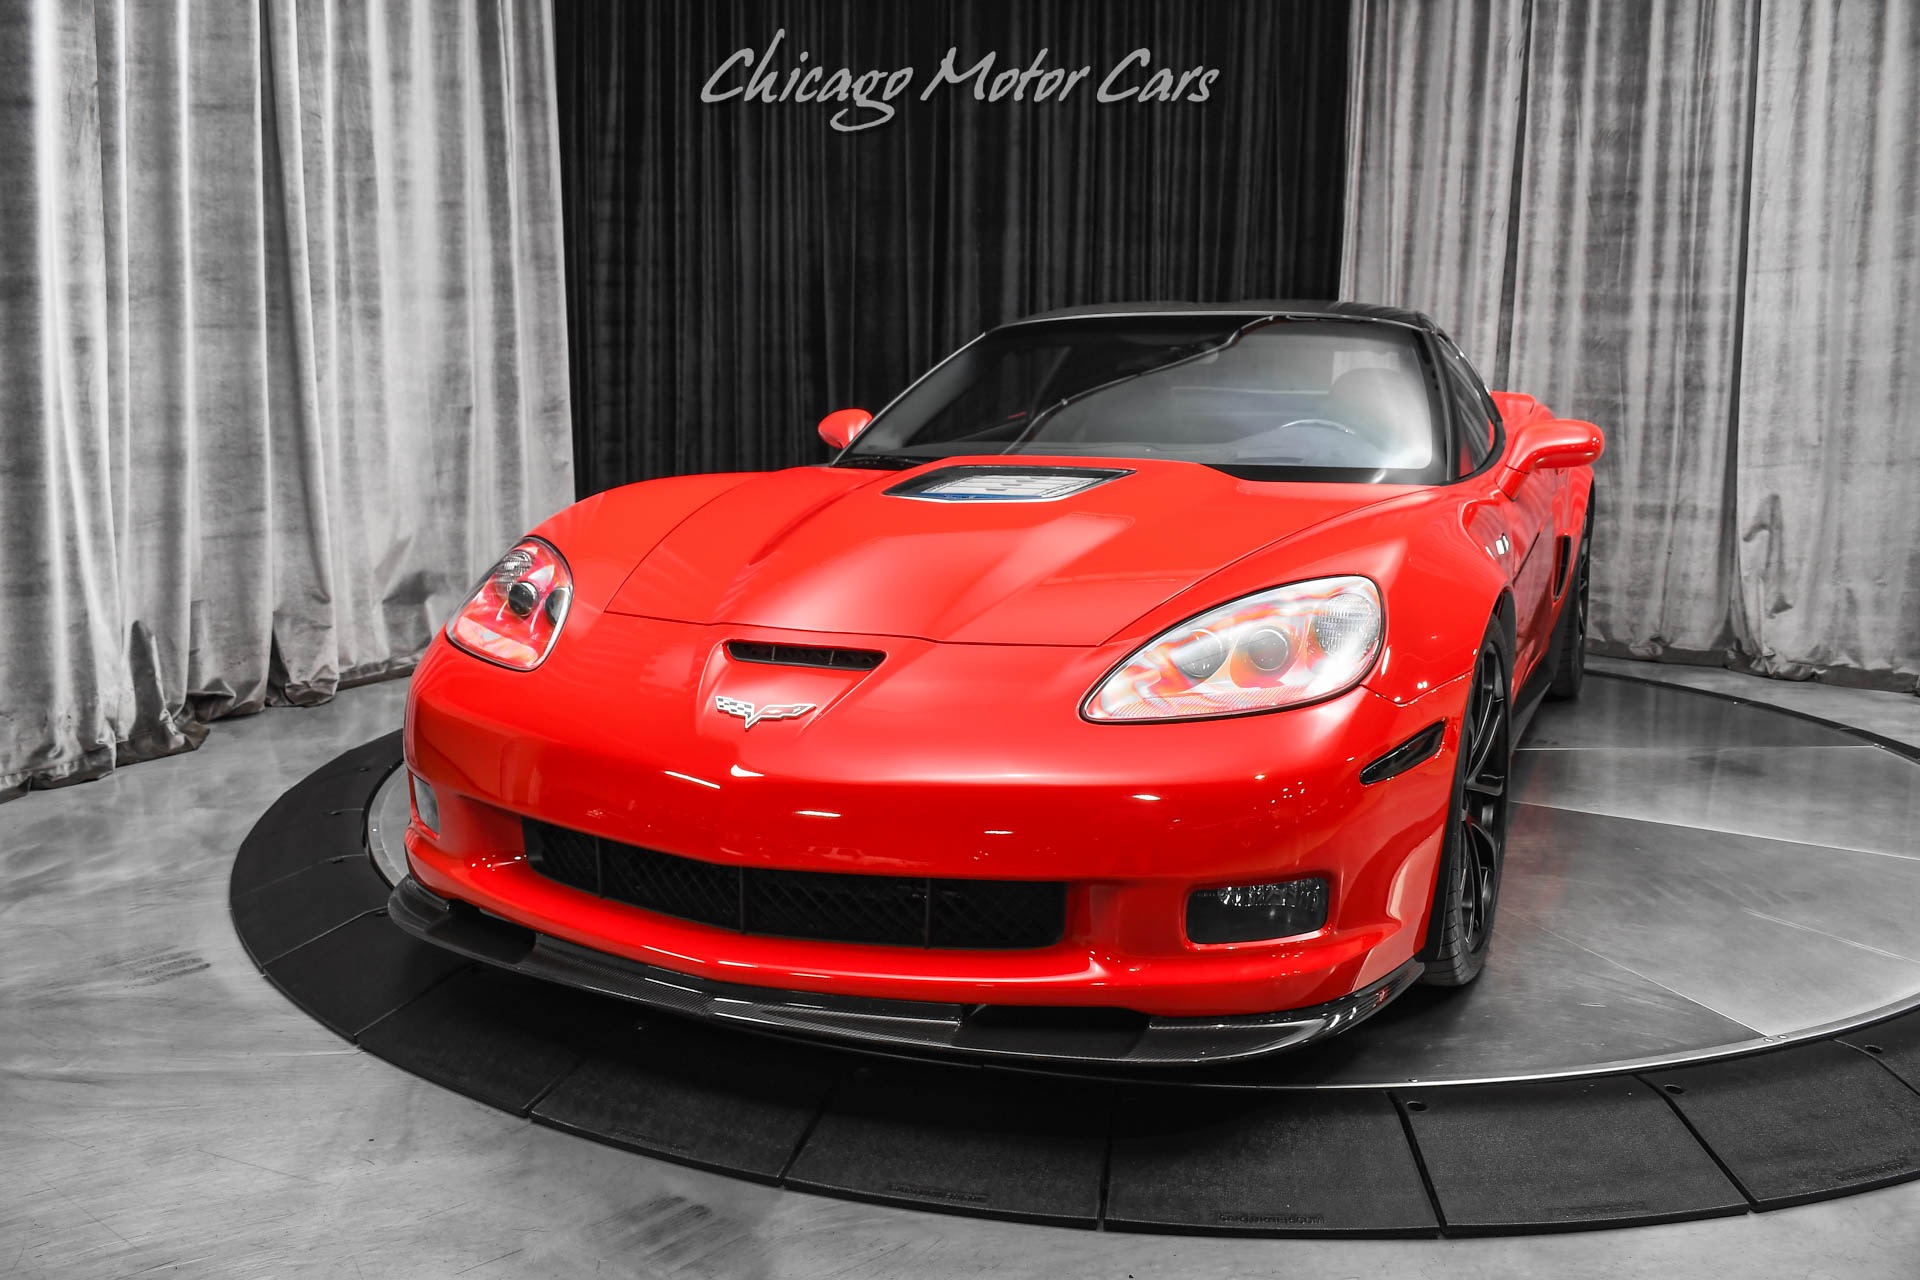 Used 2010 Chevrolet Corvette ZR1 3ZR ONLY 9K MILES RARE Torch Red 